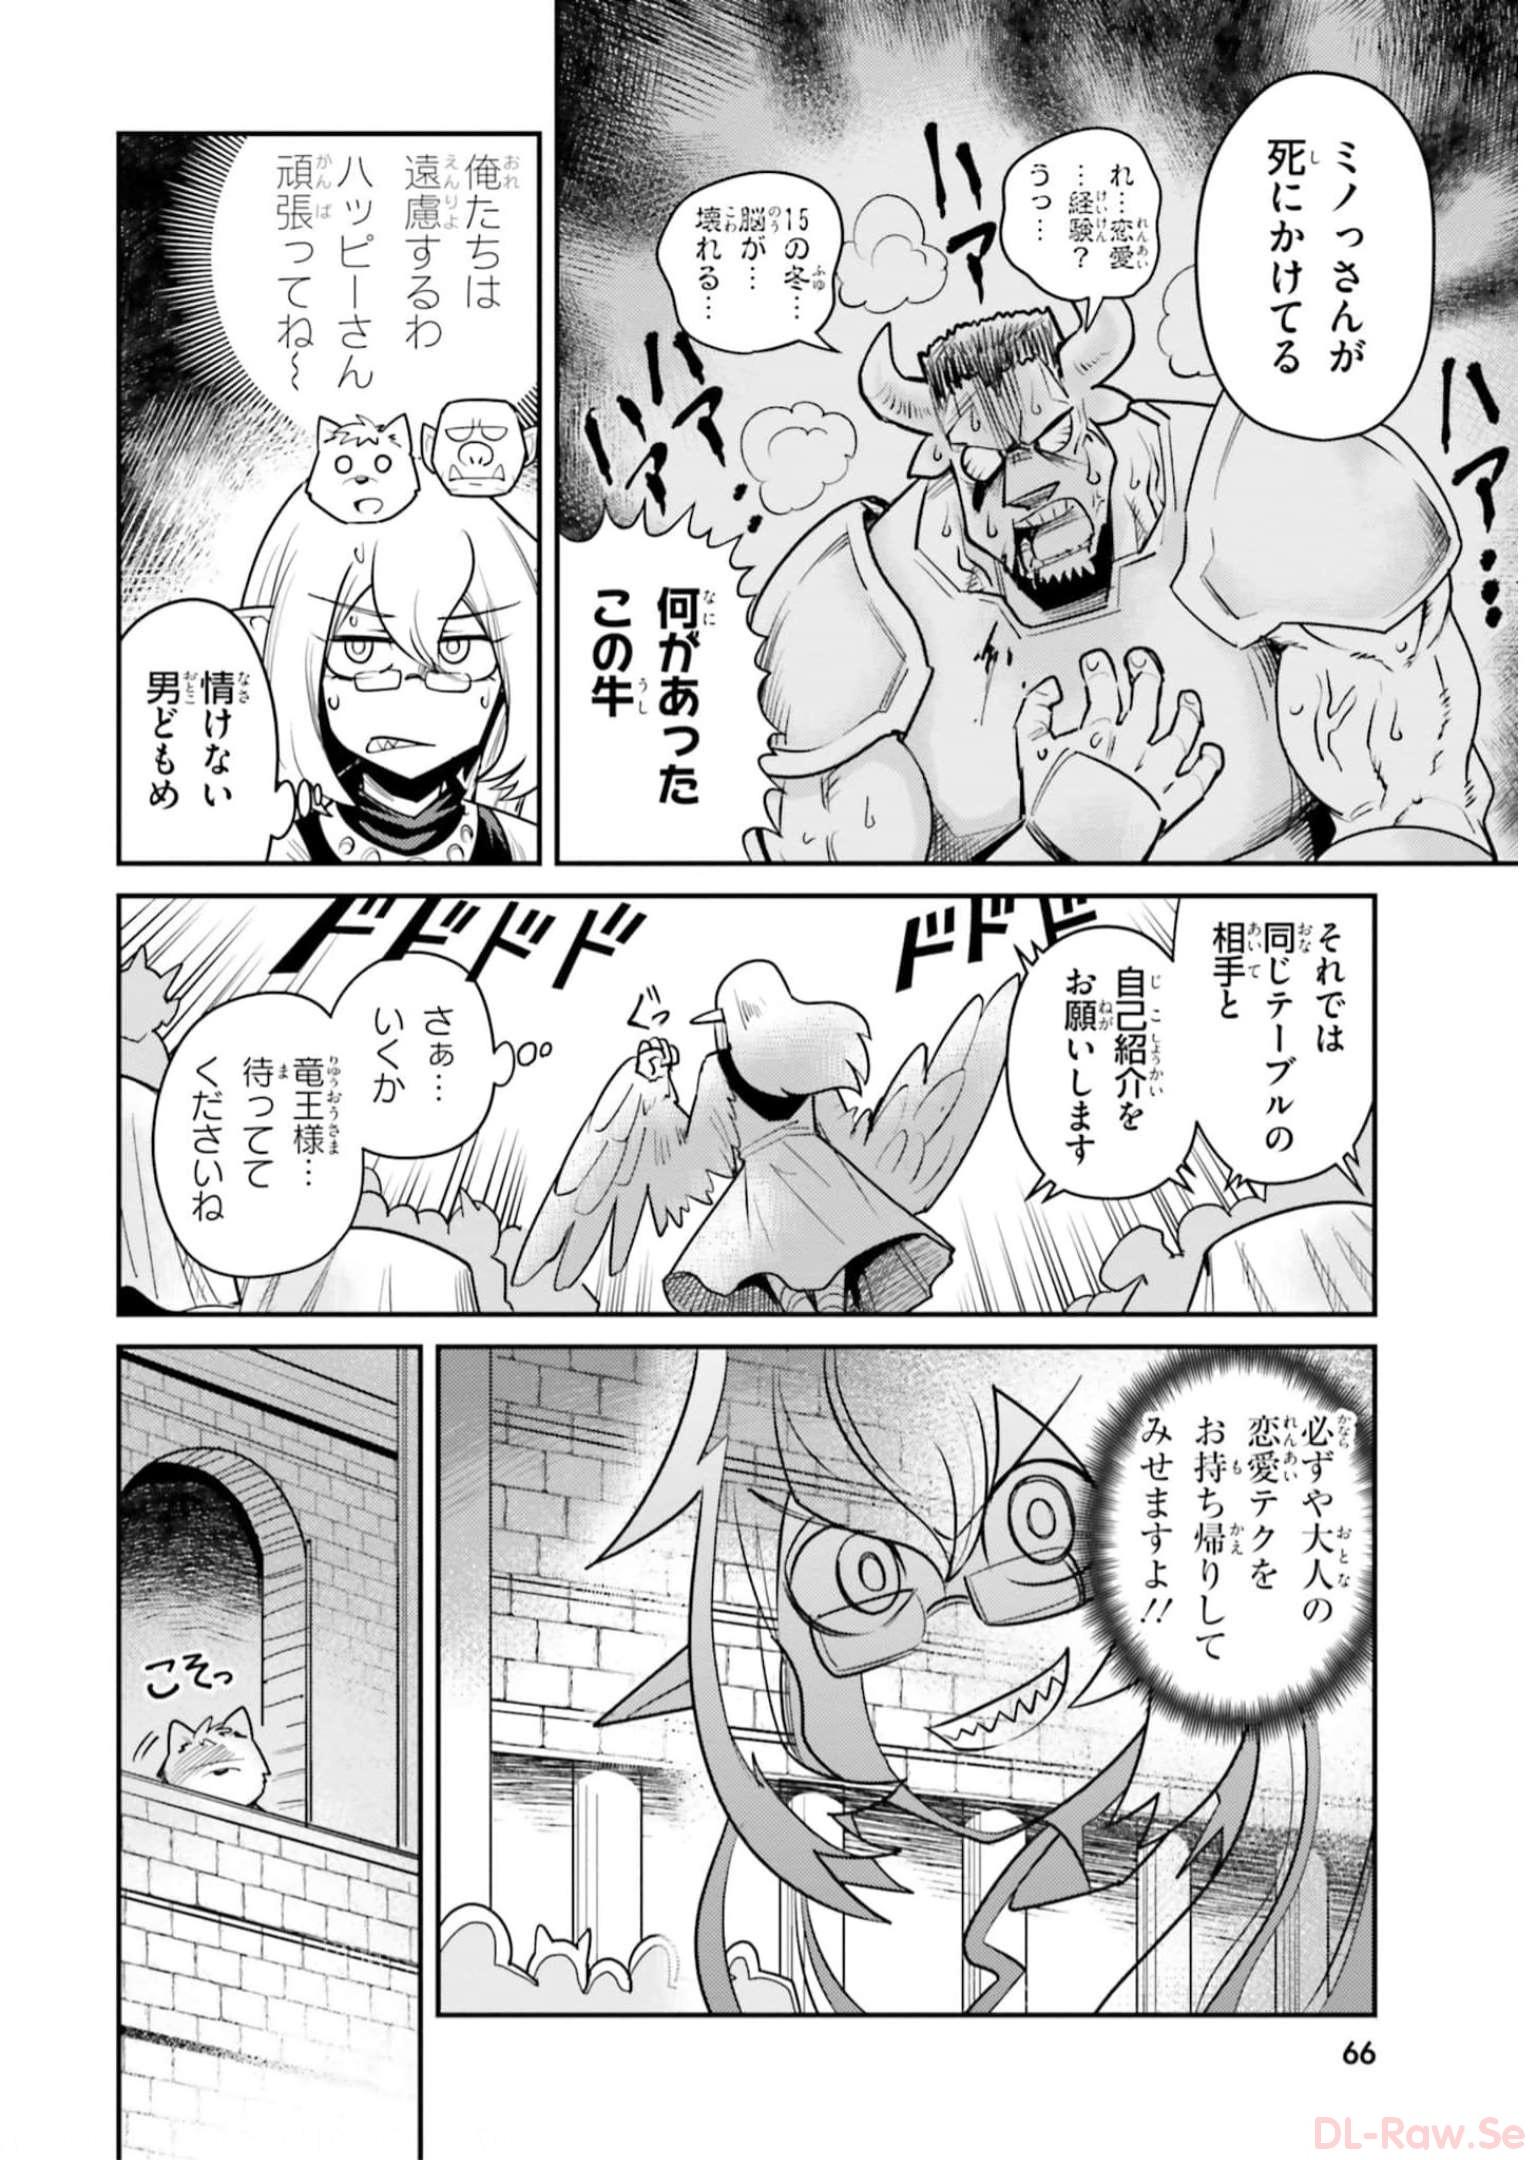 Dungeon Friends Forever Dungeon’s Childhood Friend ダンジョンの幼なじみ 第14話 - Page 4